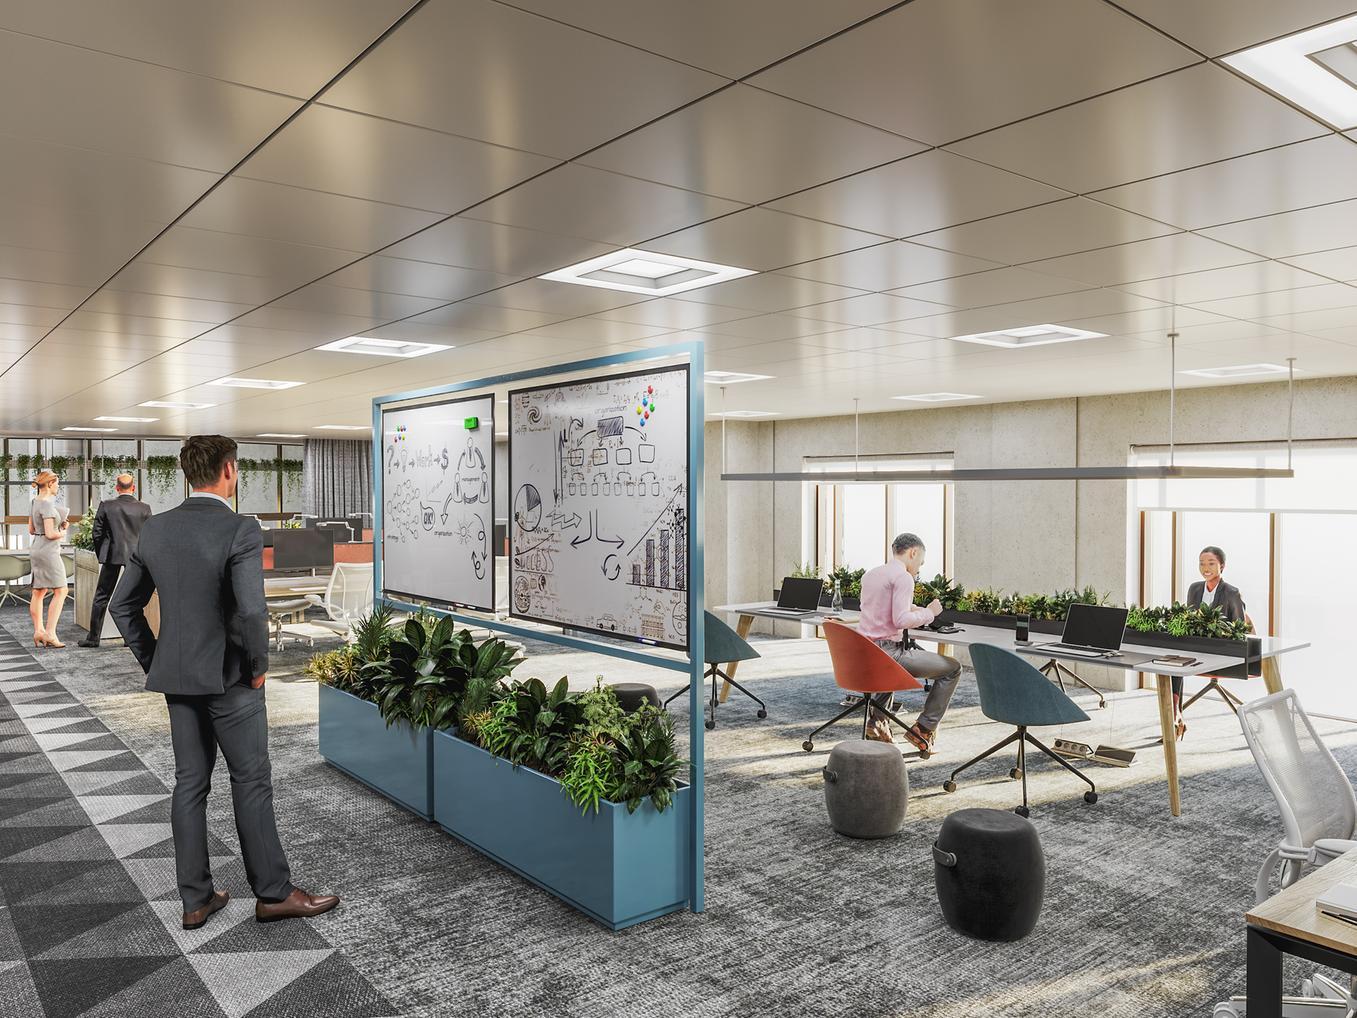 The open plan office space will be bright, airy and with lots of plants for added greenery.